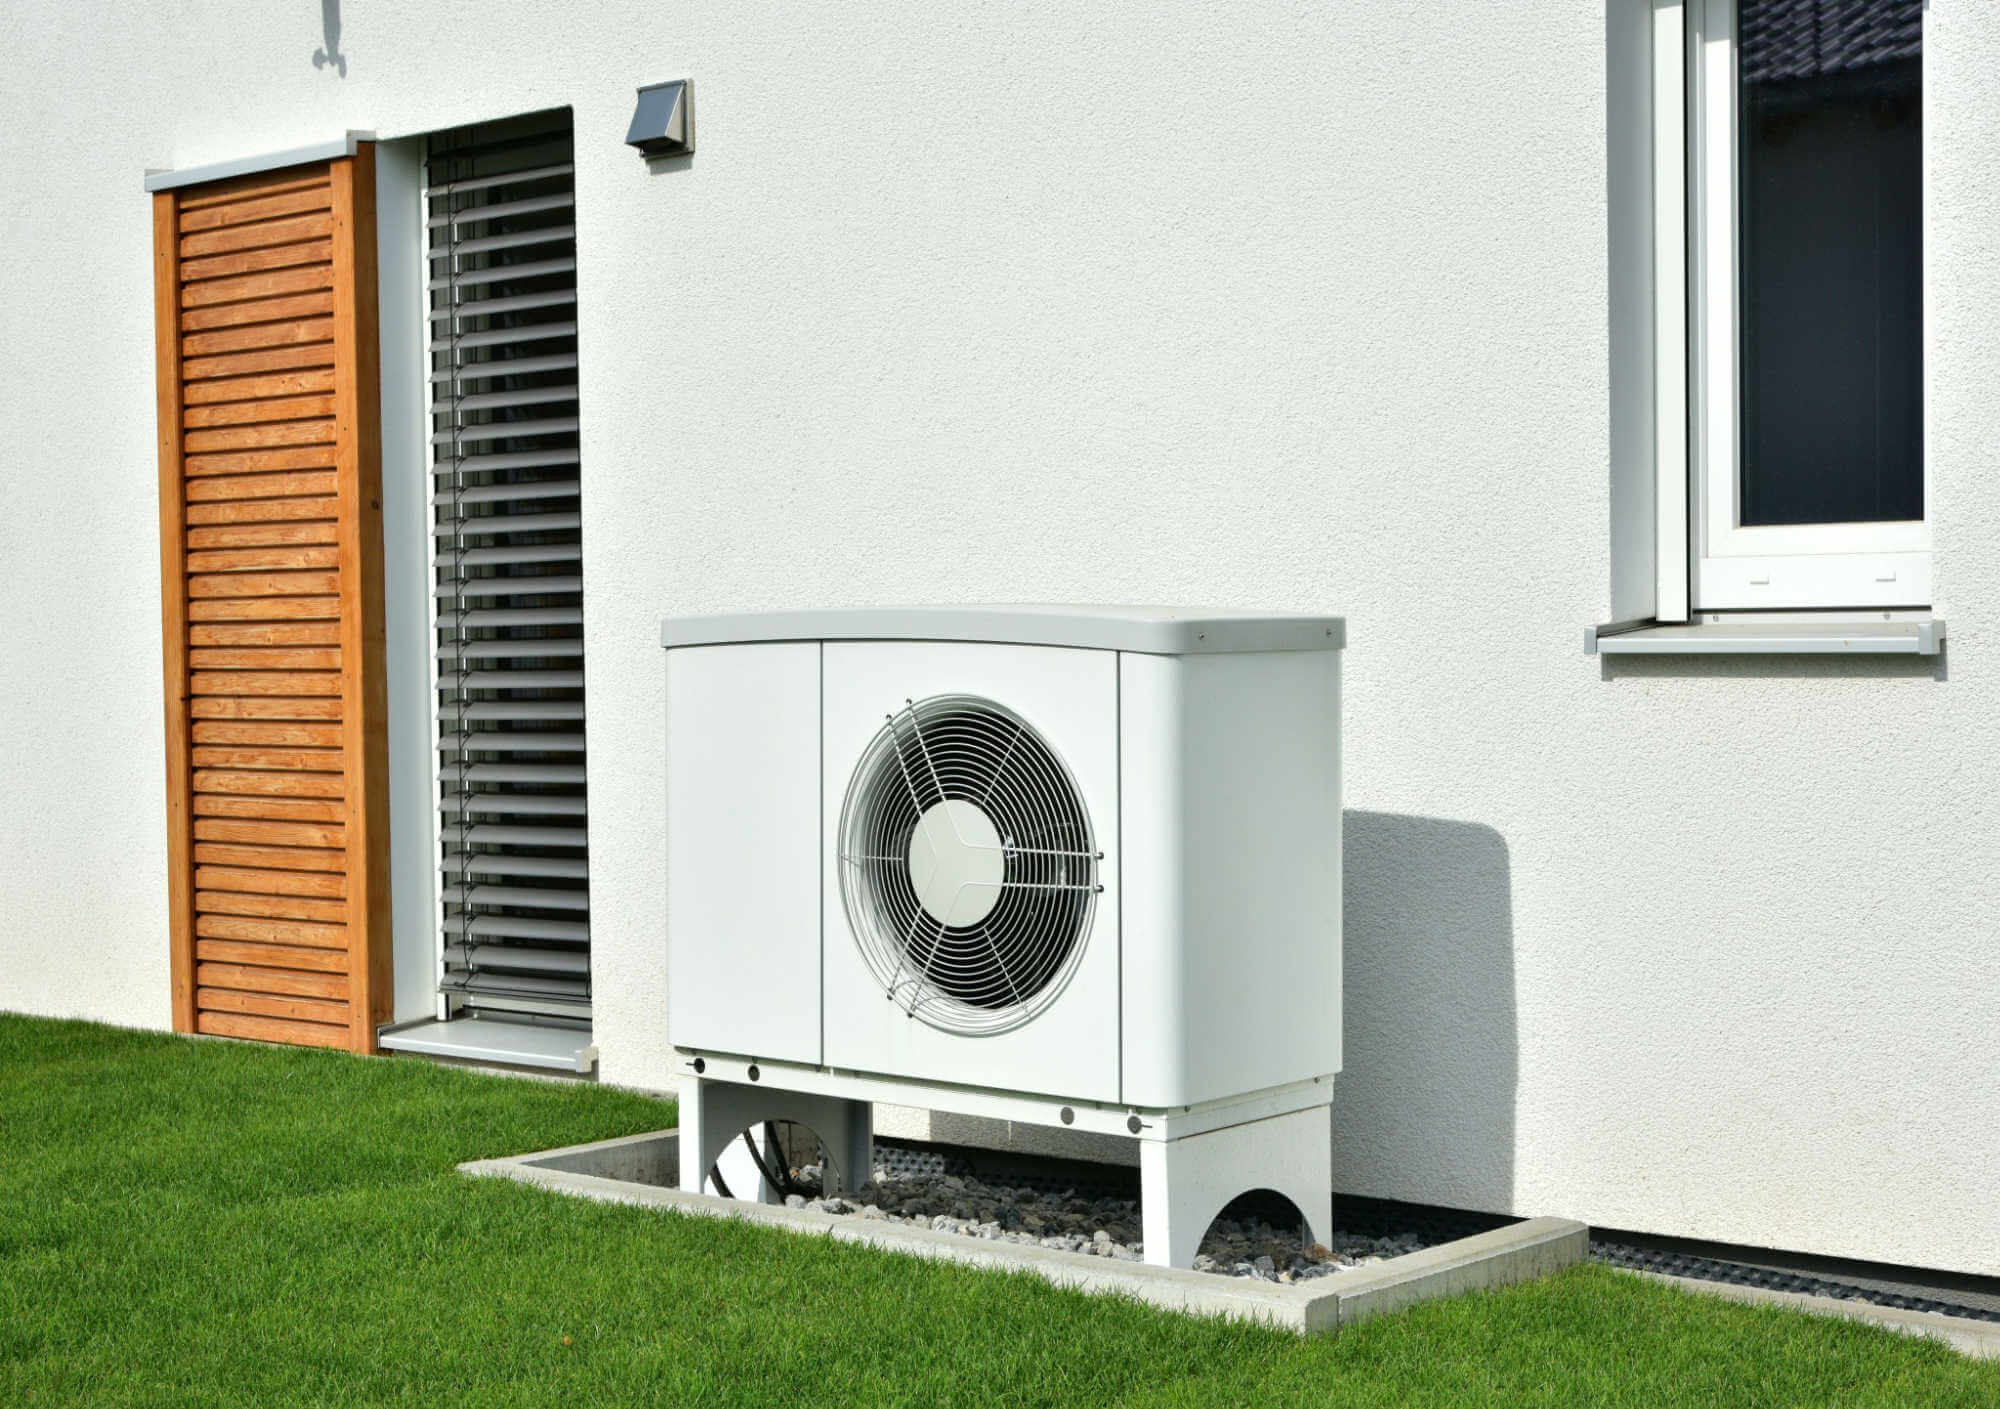 grants-for-heat-pumps-everything-there-is-to-know-move-iq